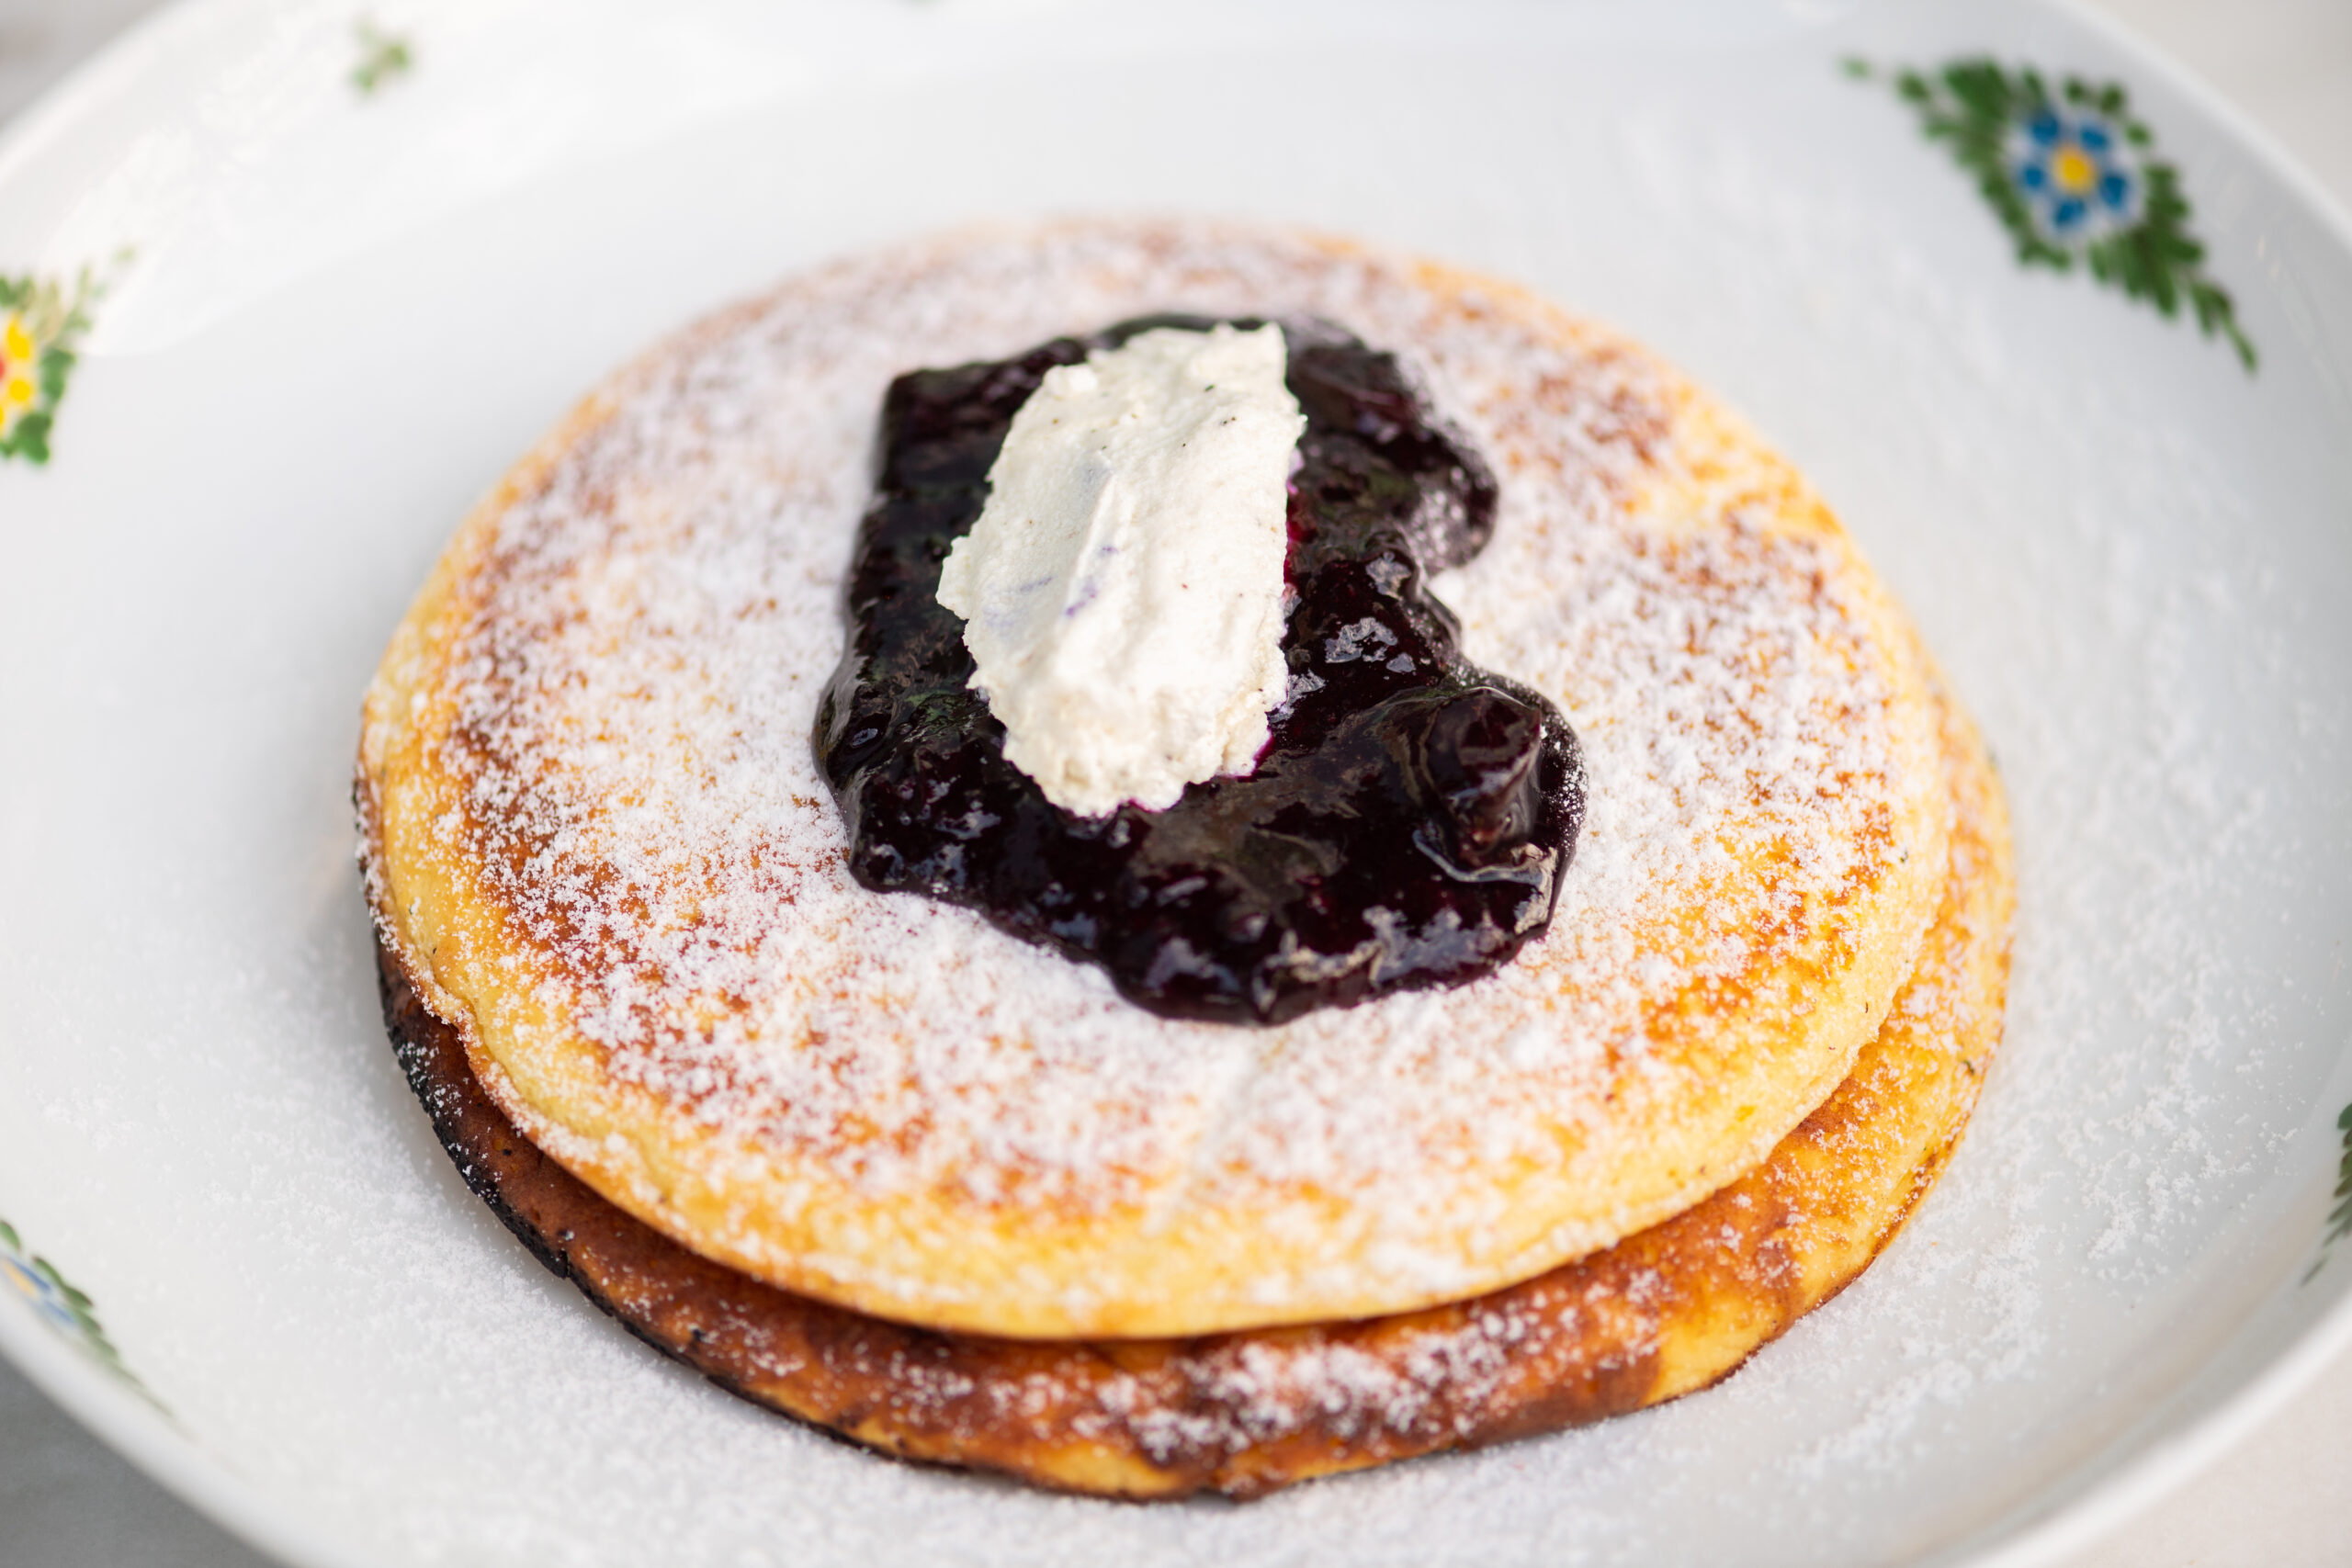 pancakes with powdered sugar, fruit compote, and whipped cream